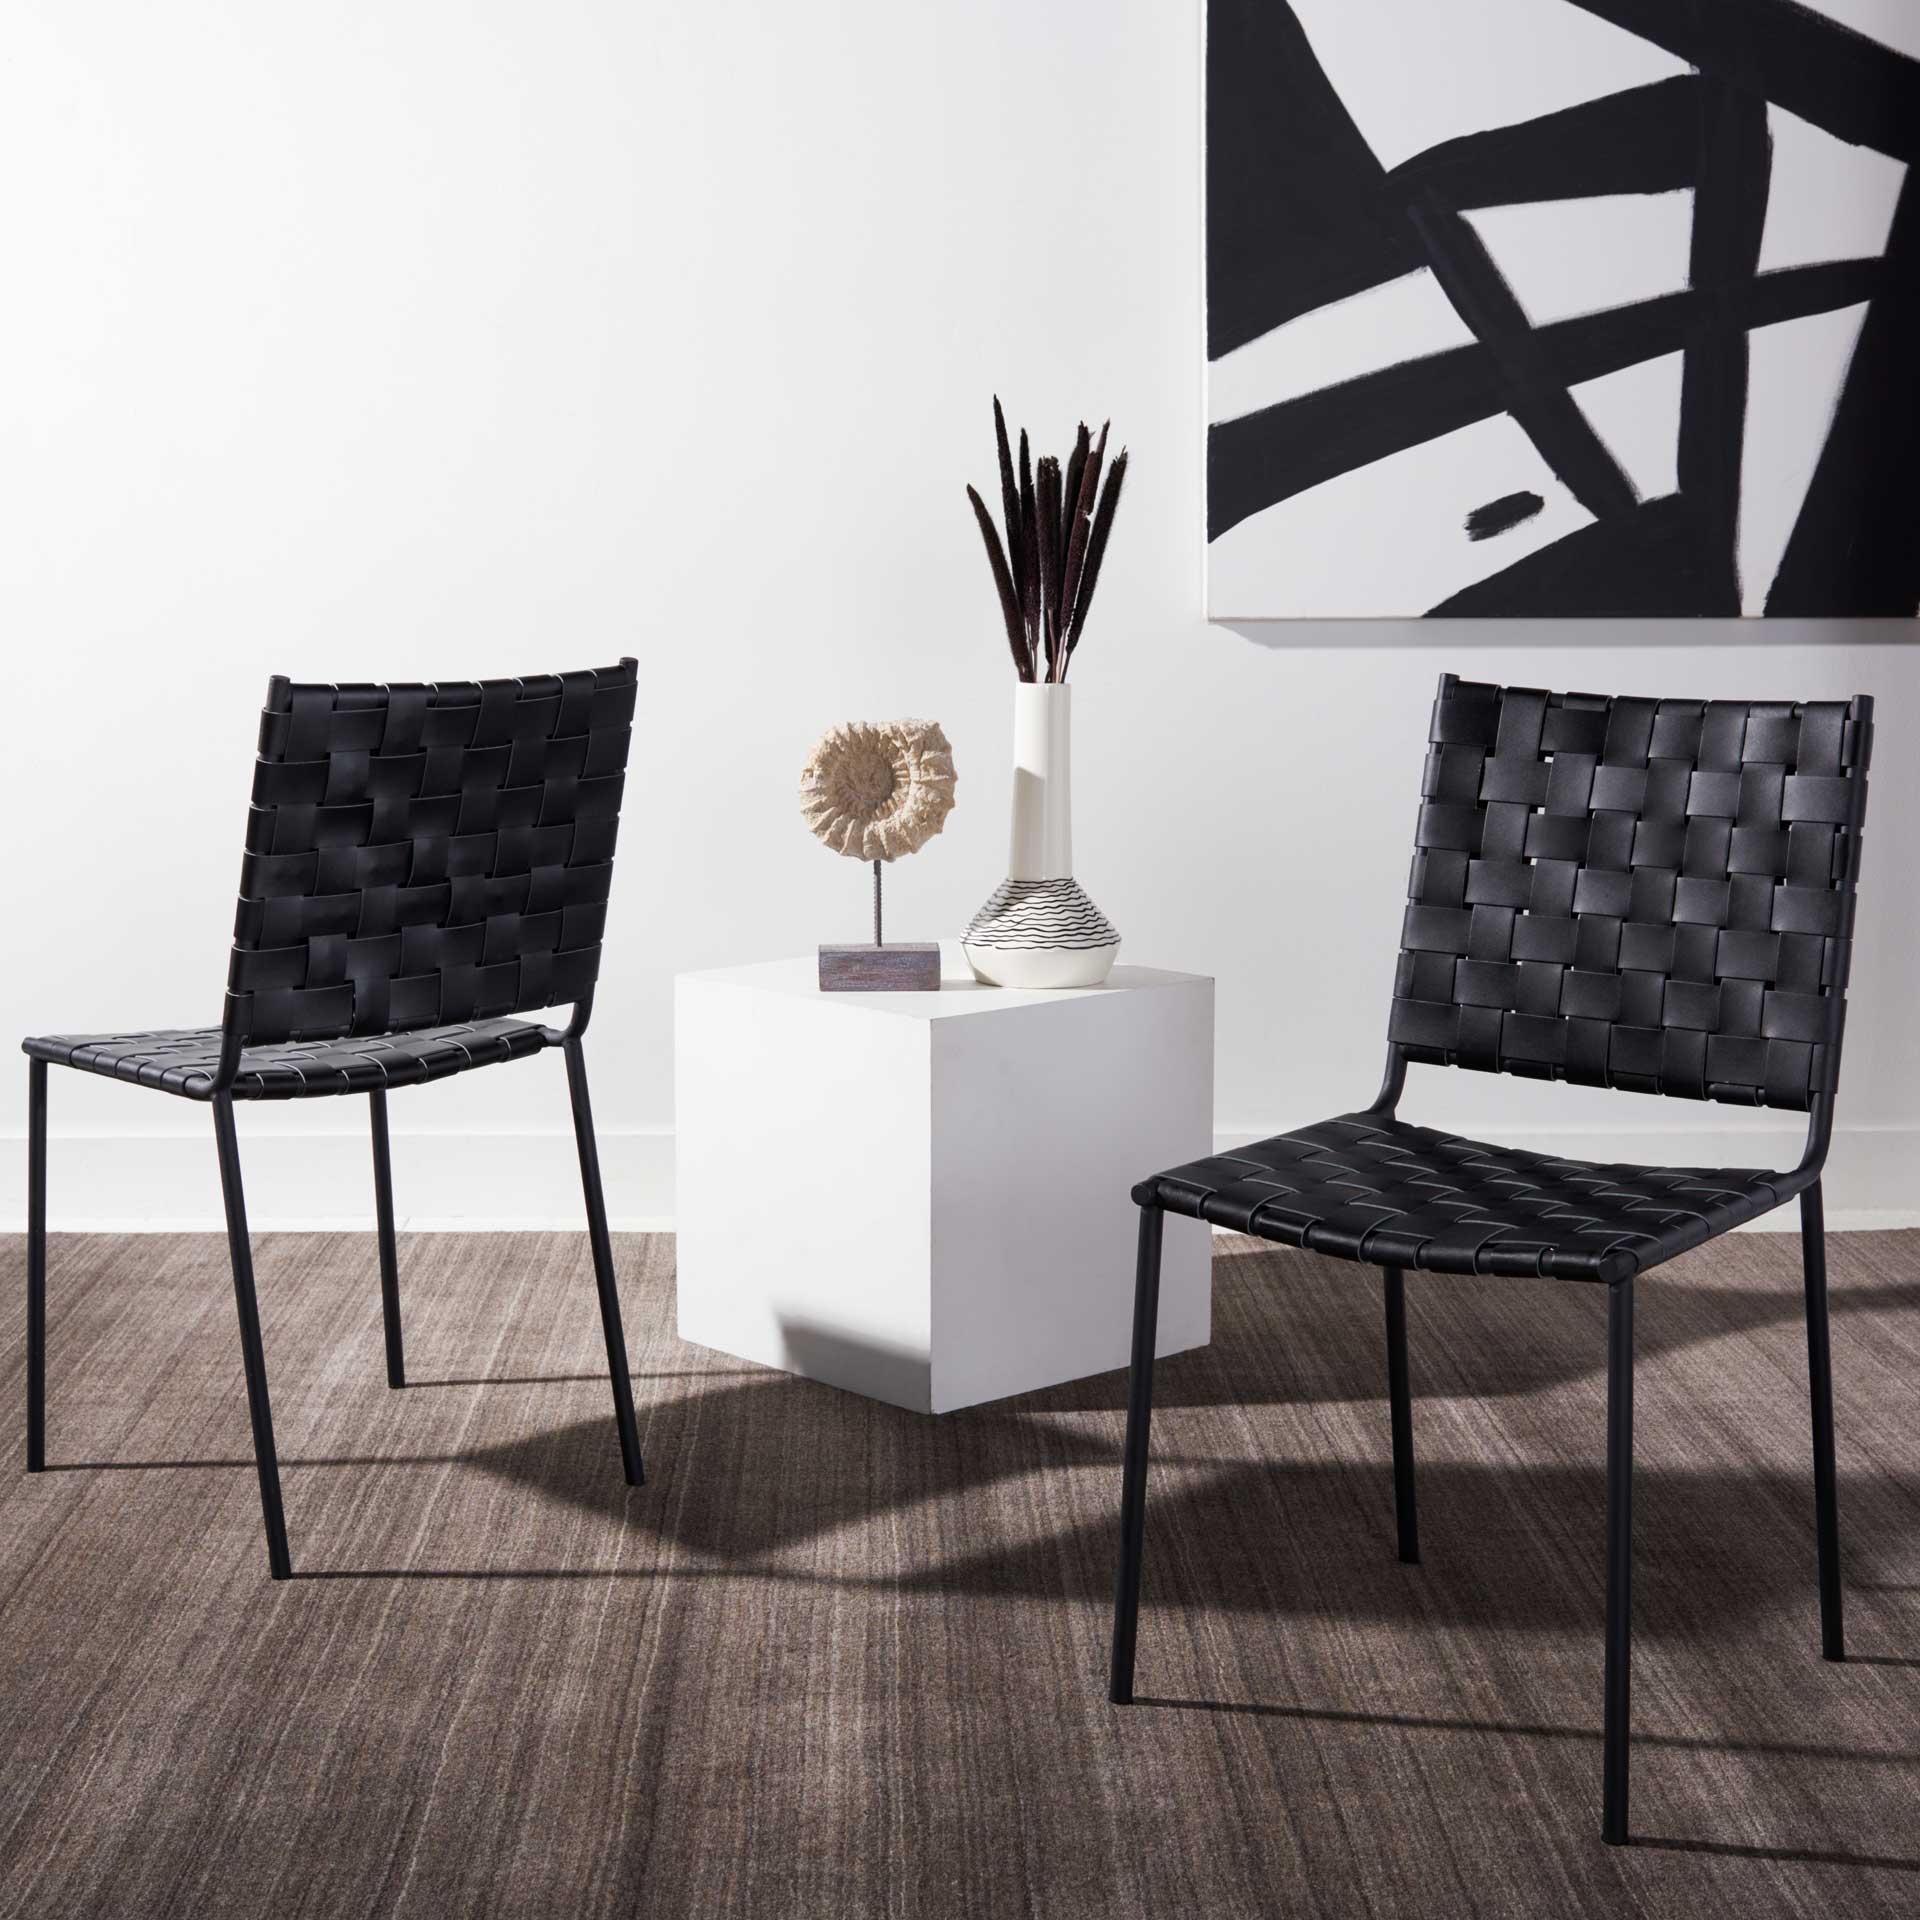 Westin Woven Dining Chair Black/Black (Set of 2)